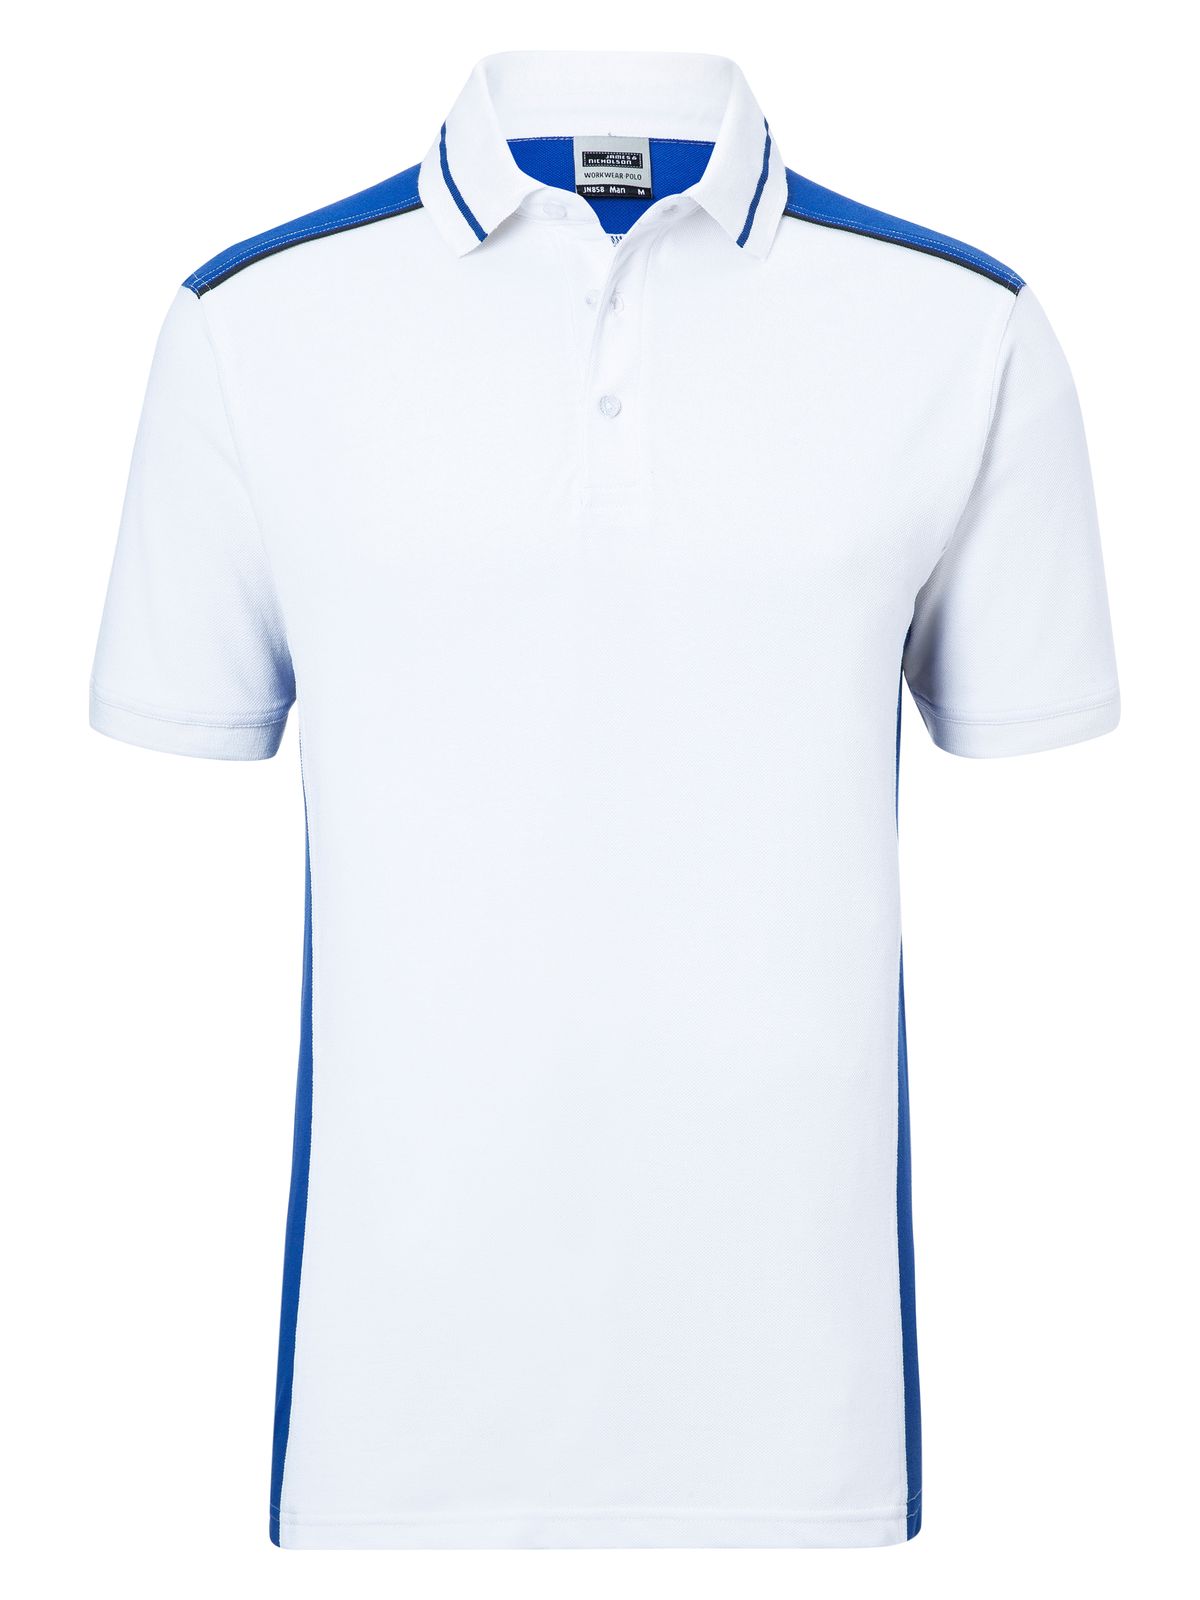 mens-workwear-polo-color-white-royal.webp